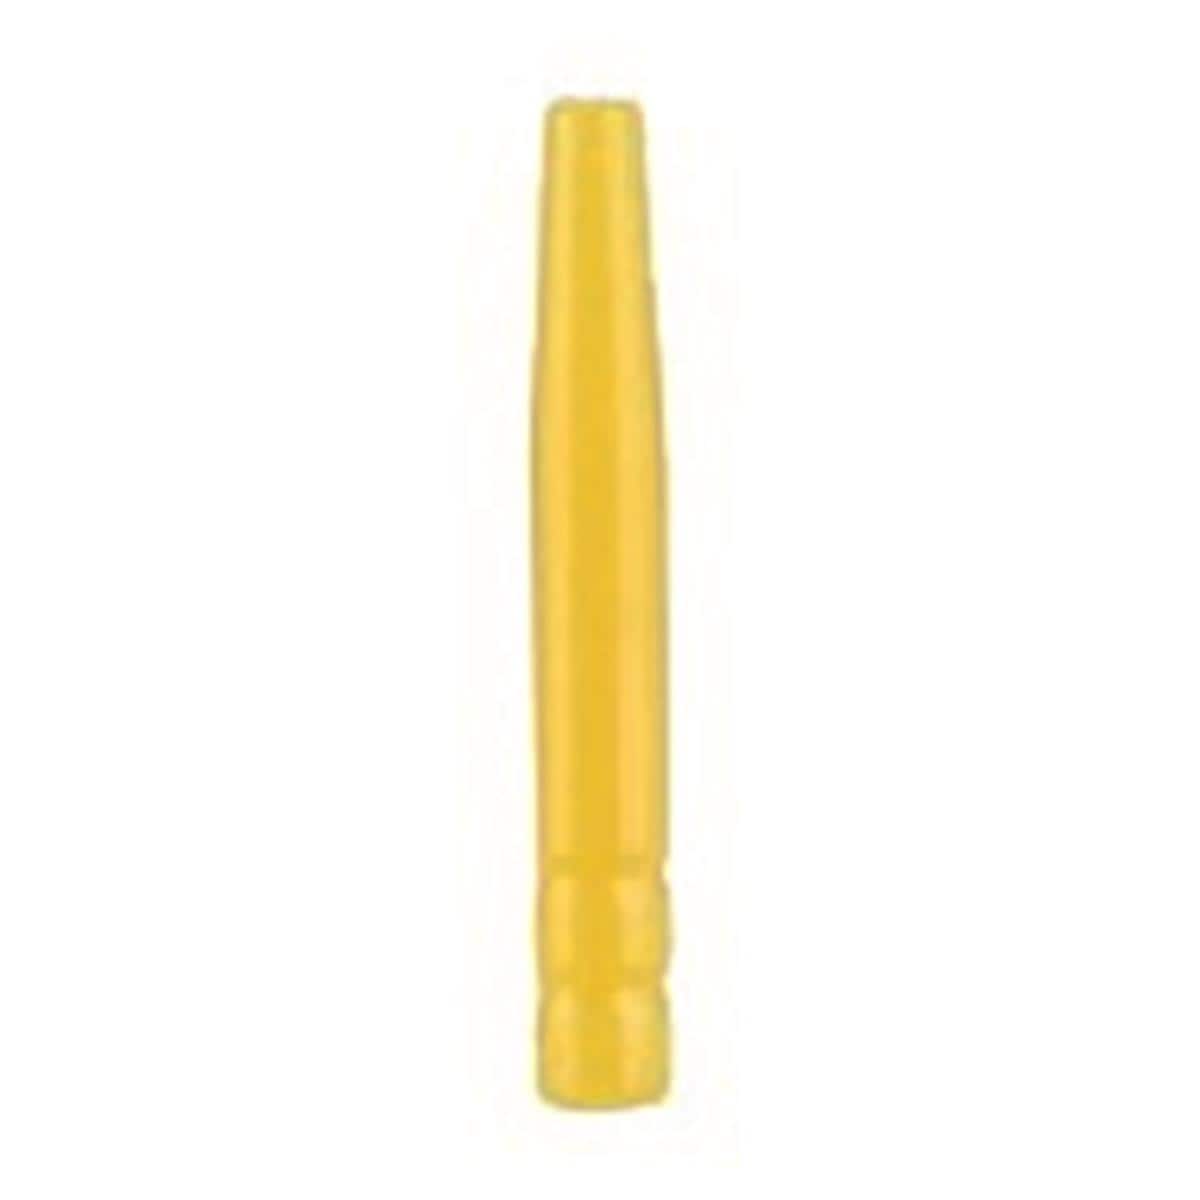 Tenons Cylindro-Coniques Calcinable L 9.5mm Jaune - Bote de 40 - CONNECT'IC